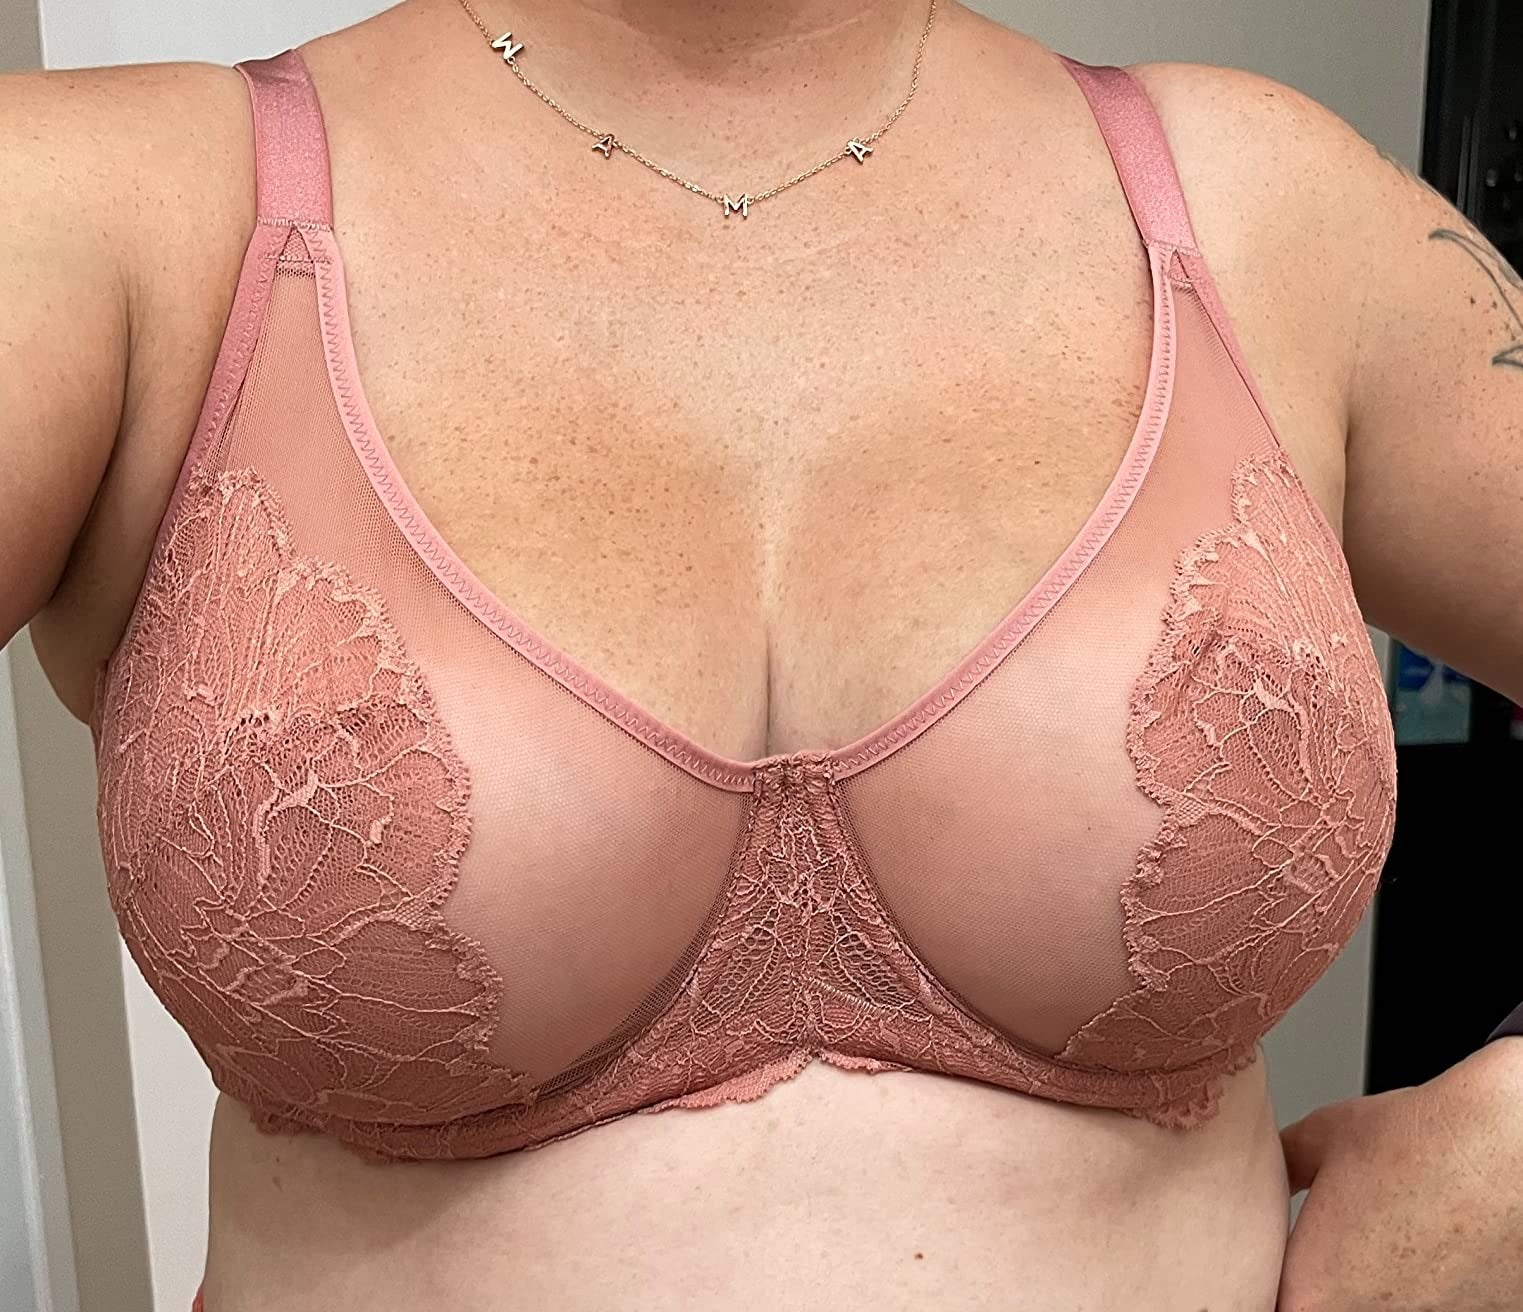 dhan montero recommends big tits sheer bra pic